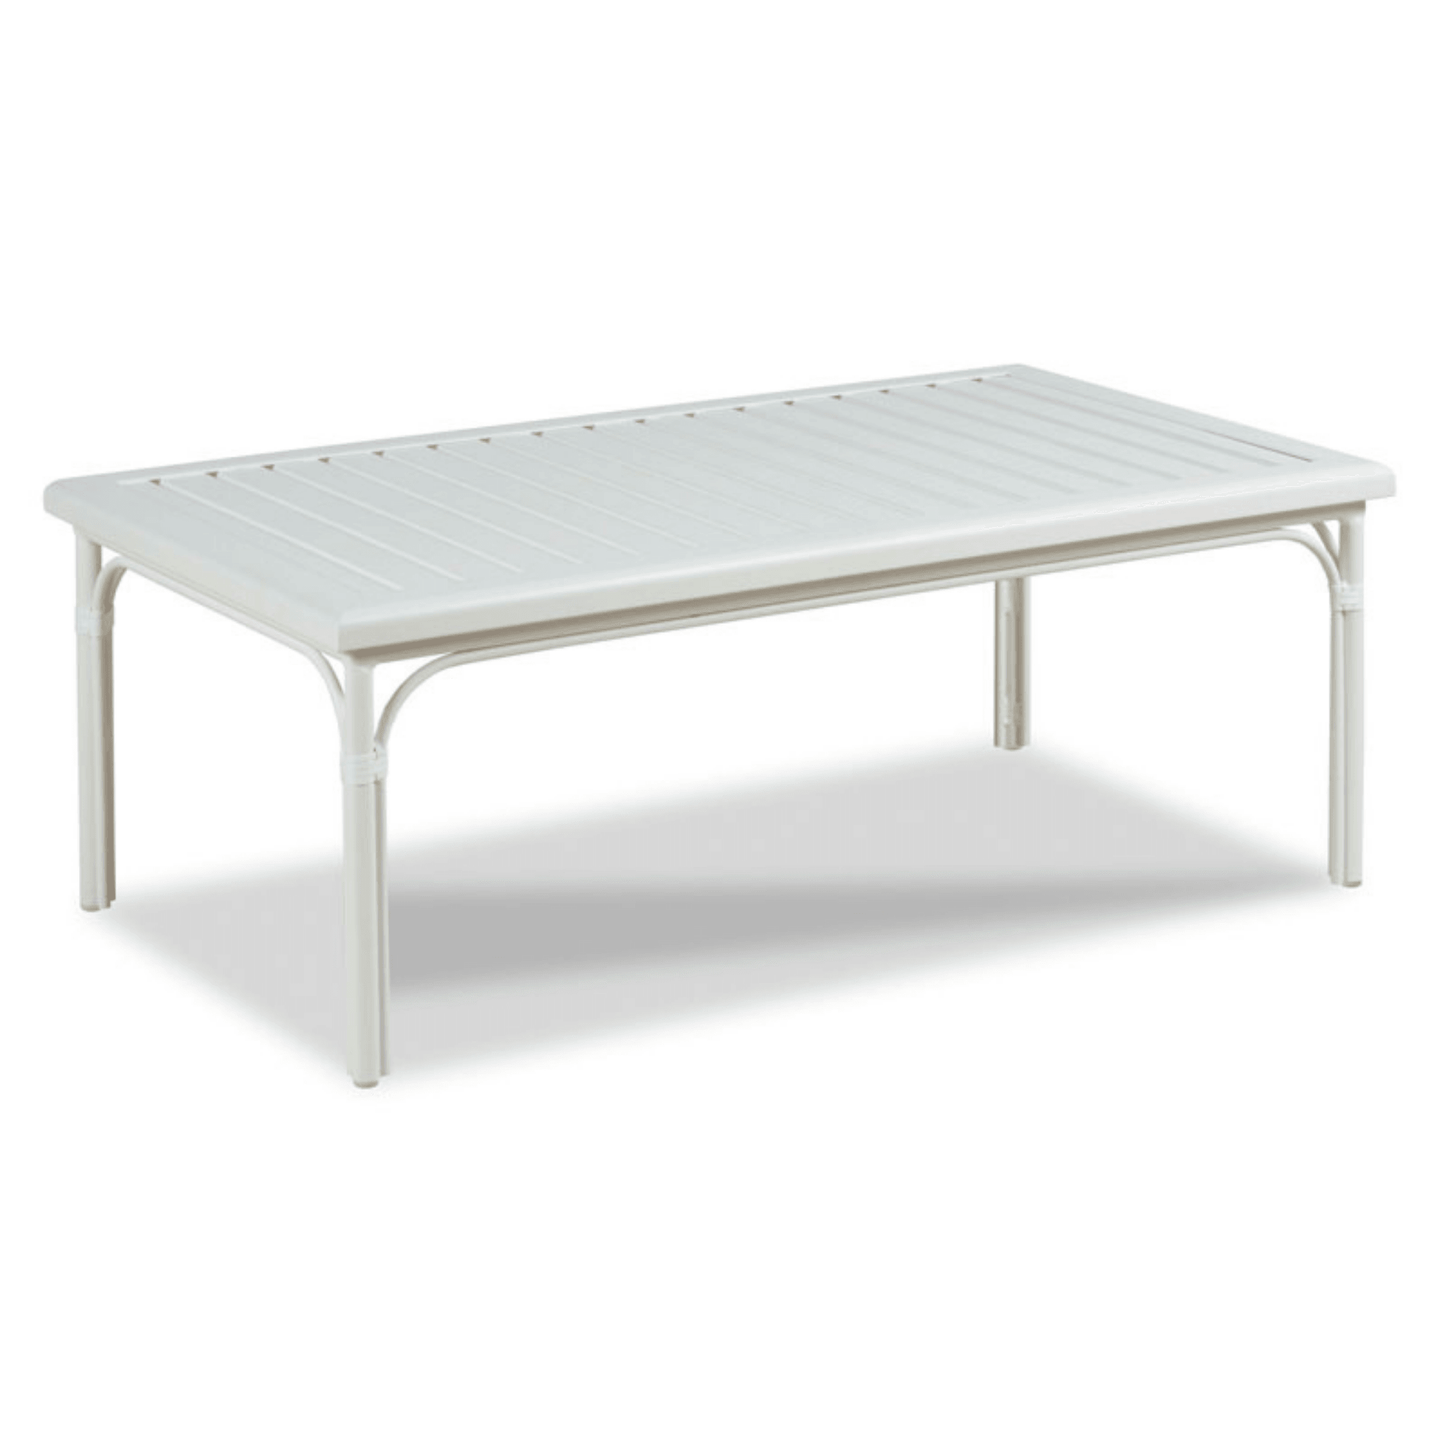 Carlyle Outdoor Cocktail Table - Fairley Fancy 